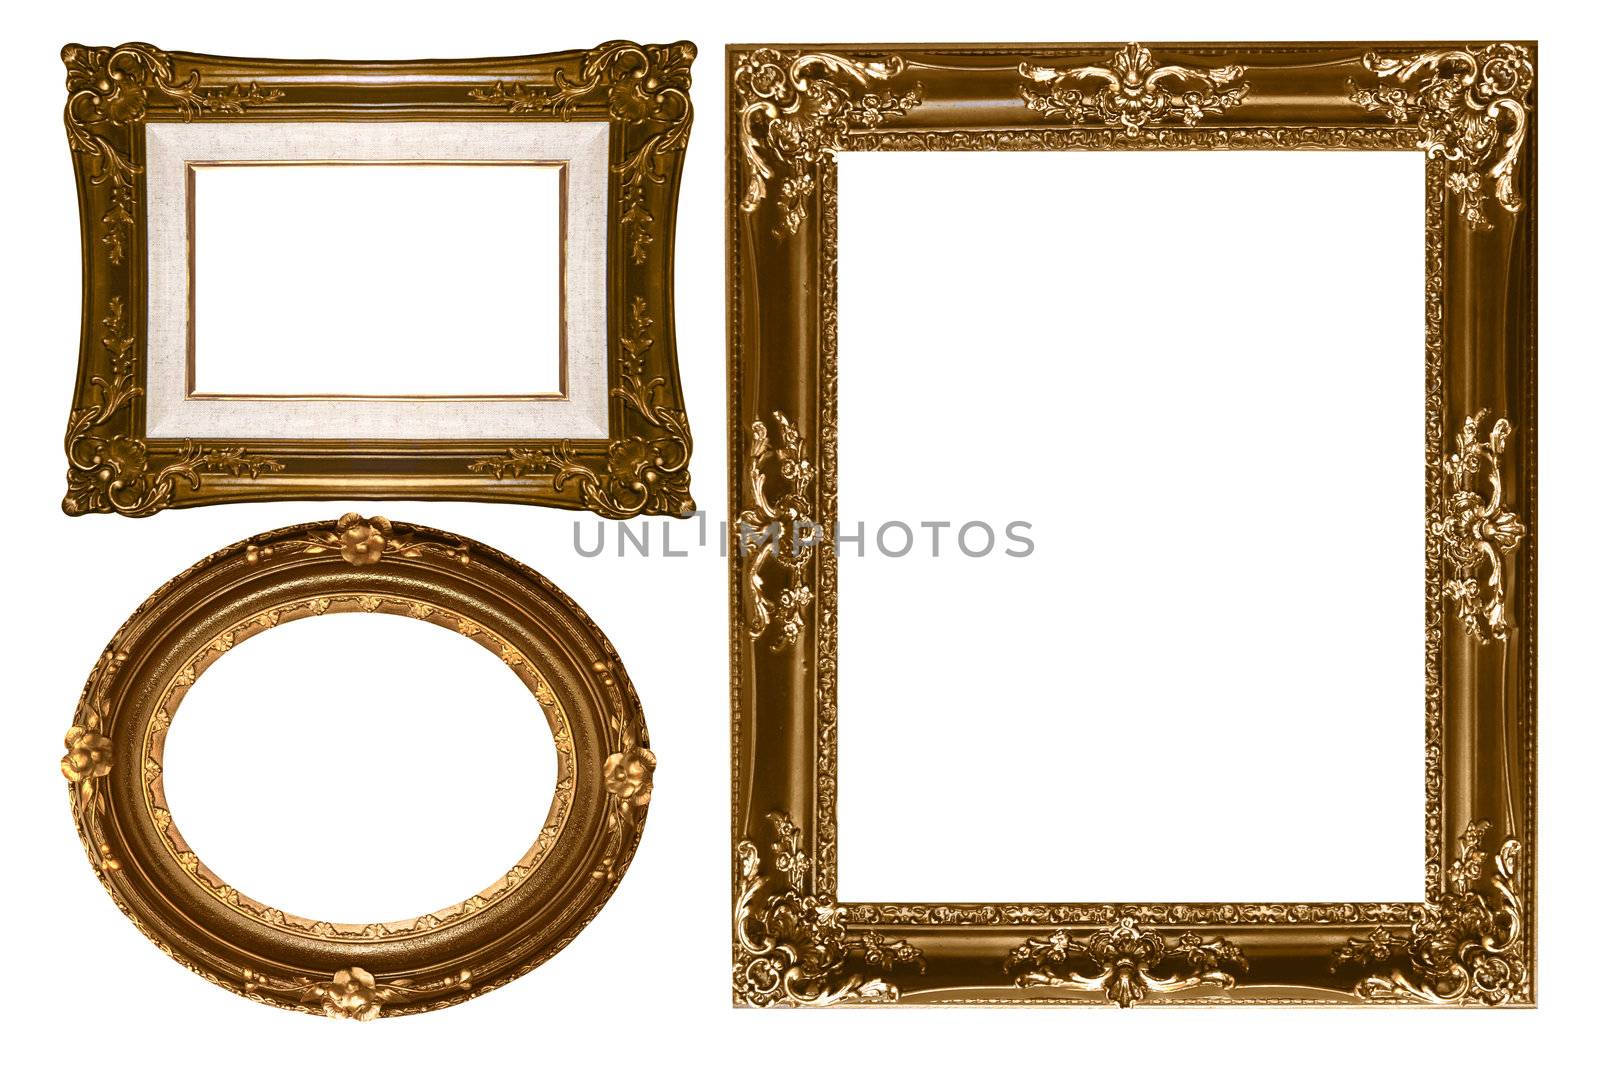 Decorative Gold Empty Wall Picture Frames to Insert Your Own Design